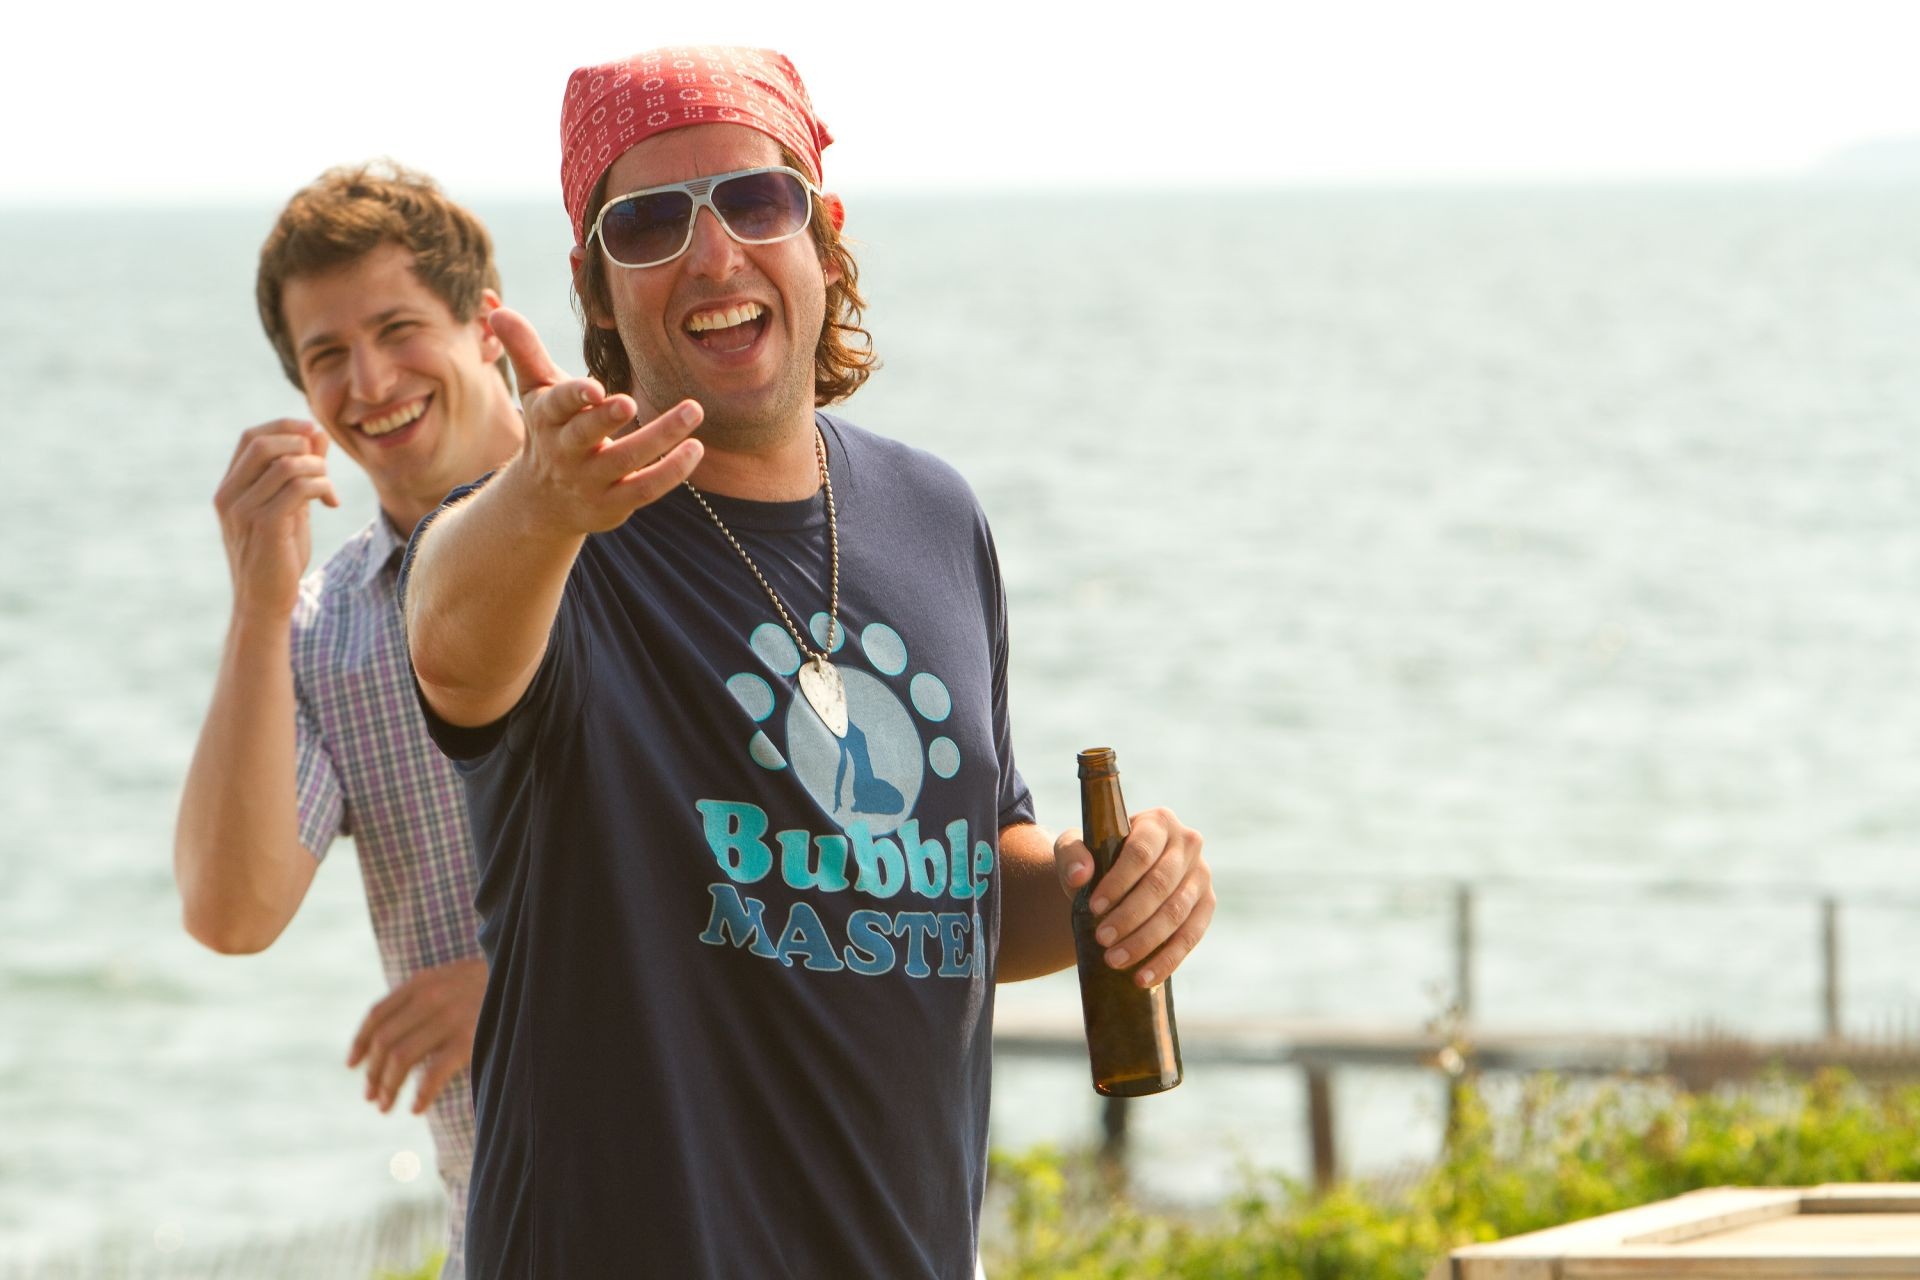 Andy Samberg stars as Todd Peterson and Adam Sandler stars as Donny Berger in Columbia Pictures' That's My Boy (2012). Photo credit by Tracy Bennett.